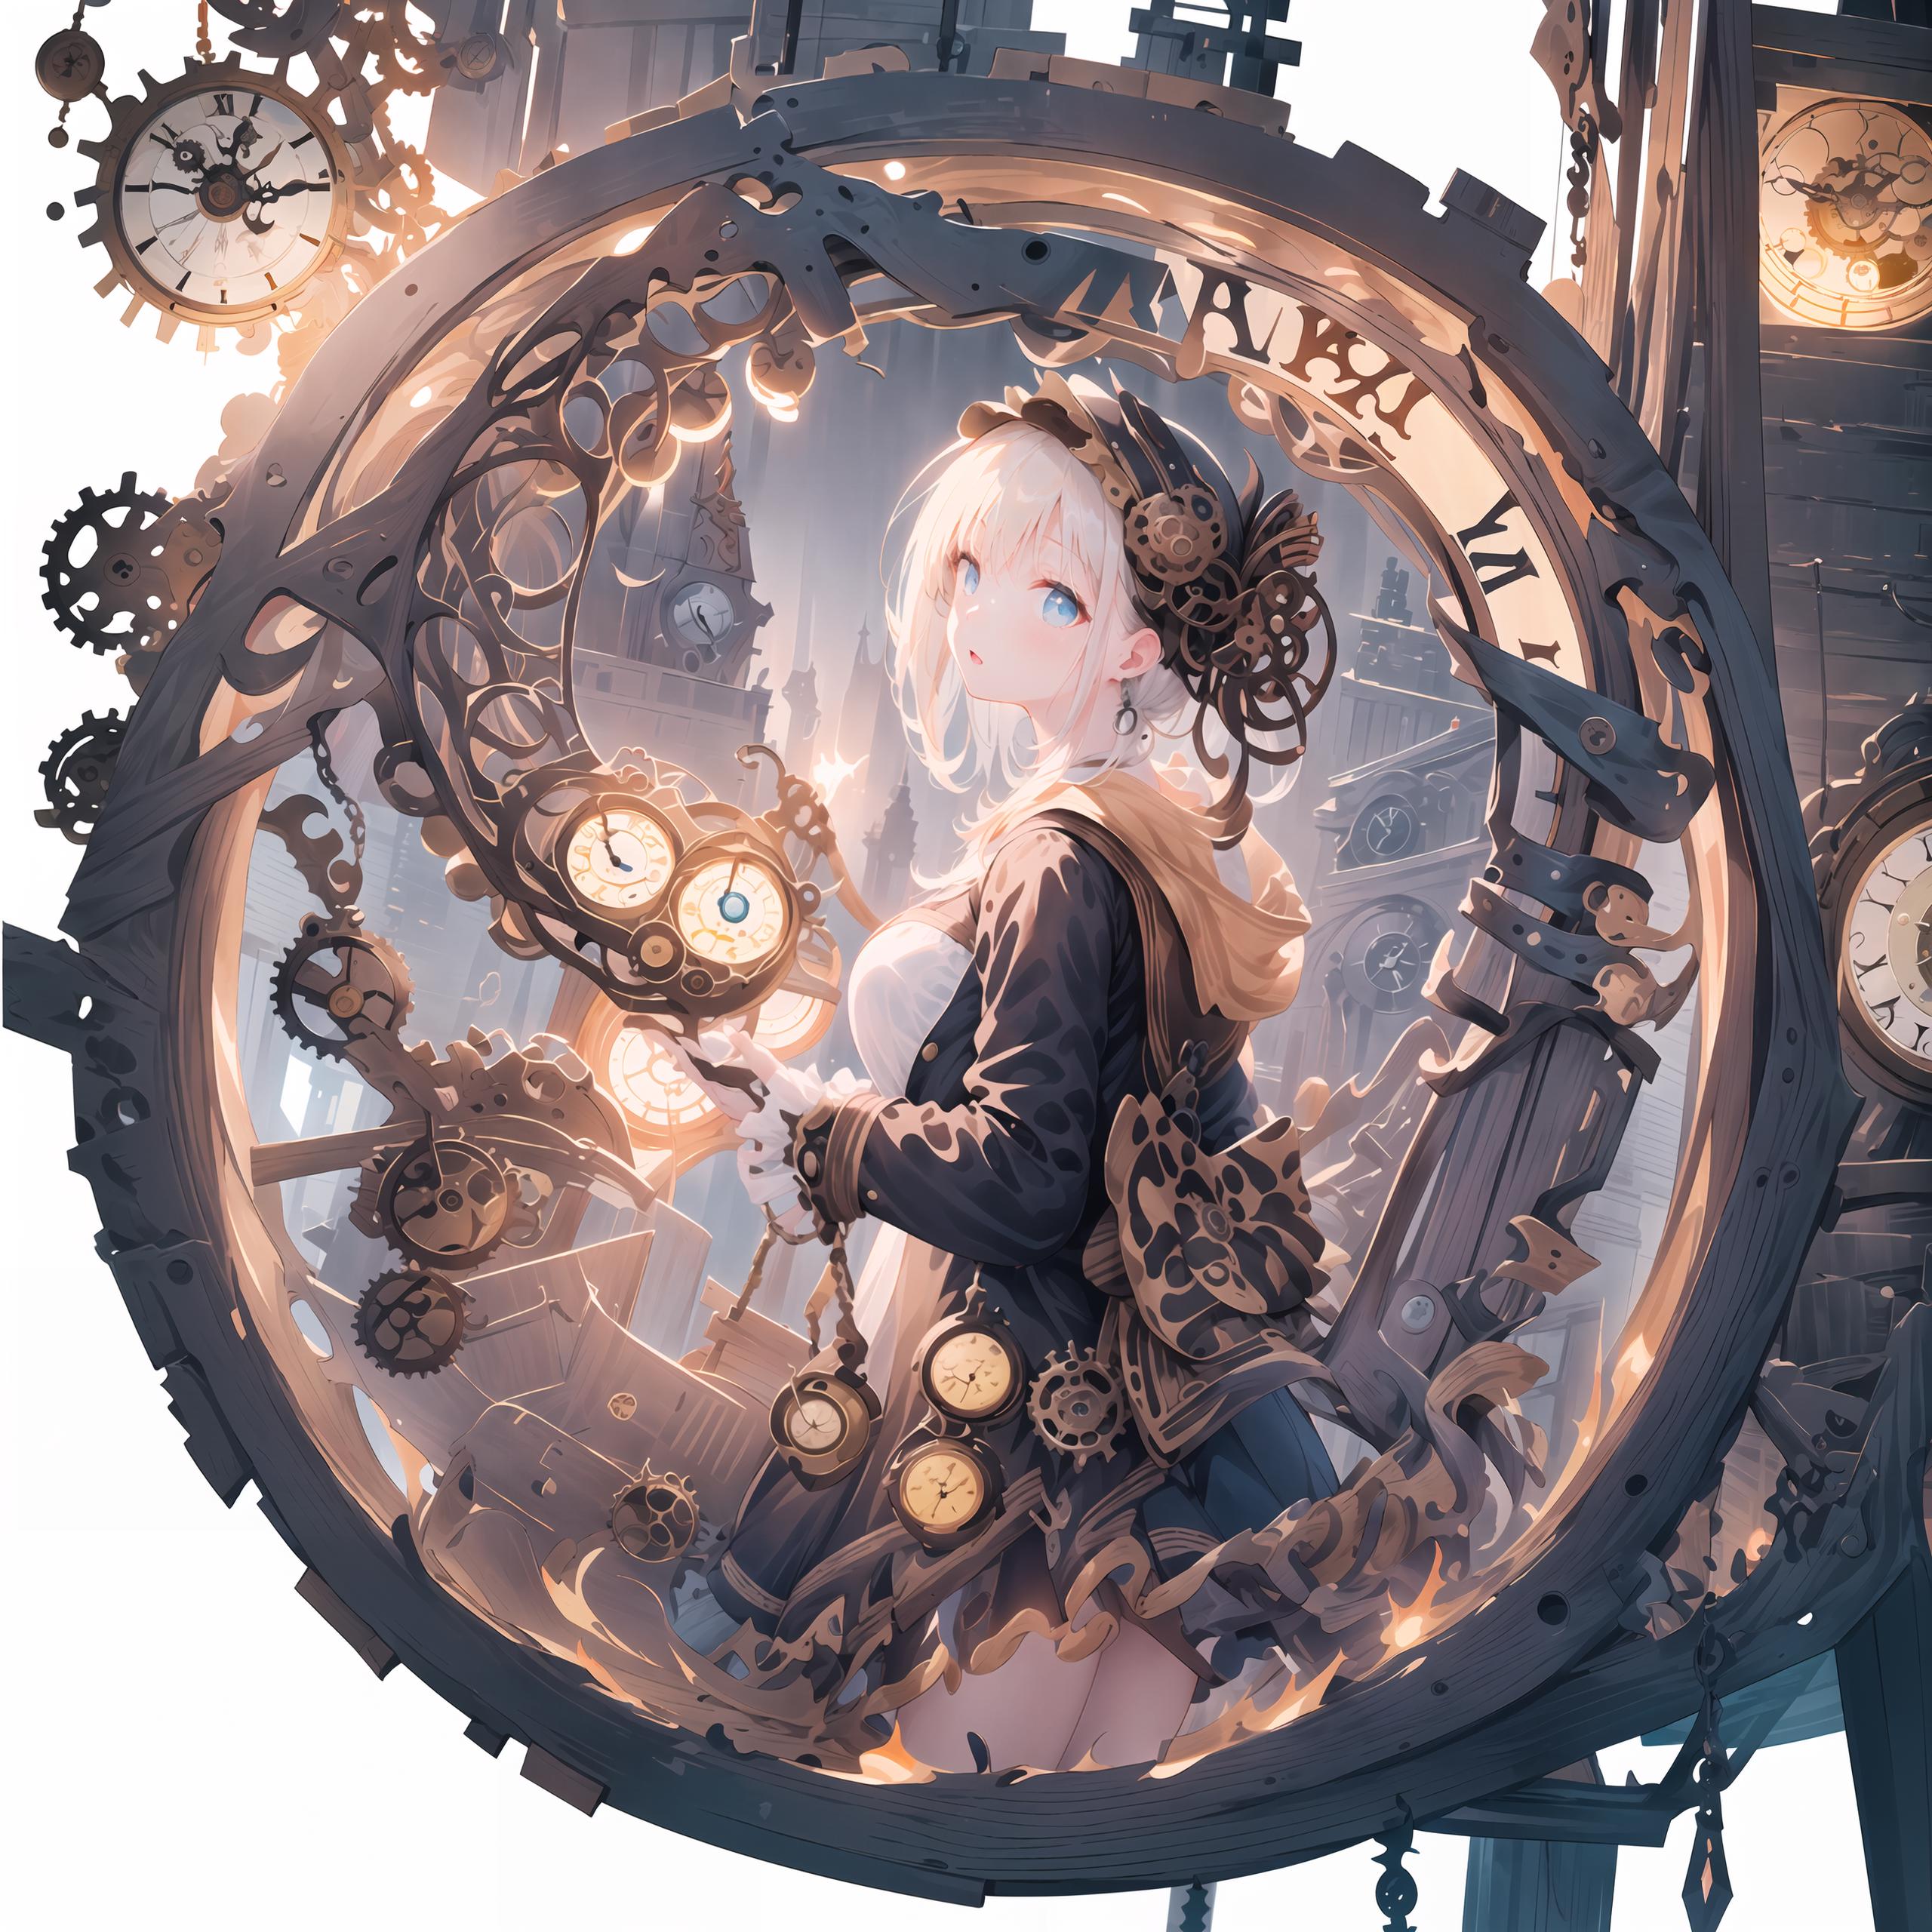 A young woman in a clock-themed environment, surrounded by multiple clocks.